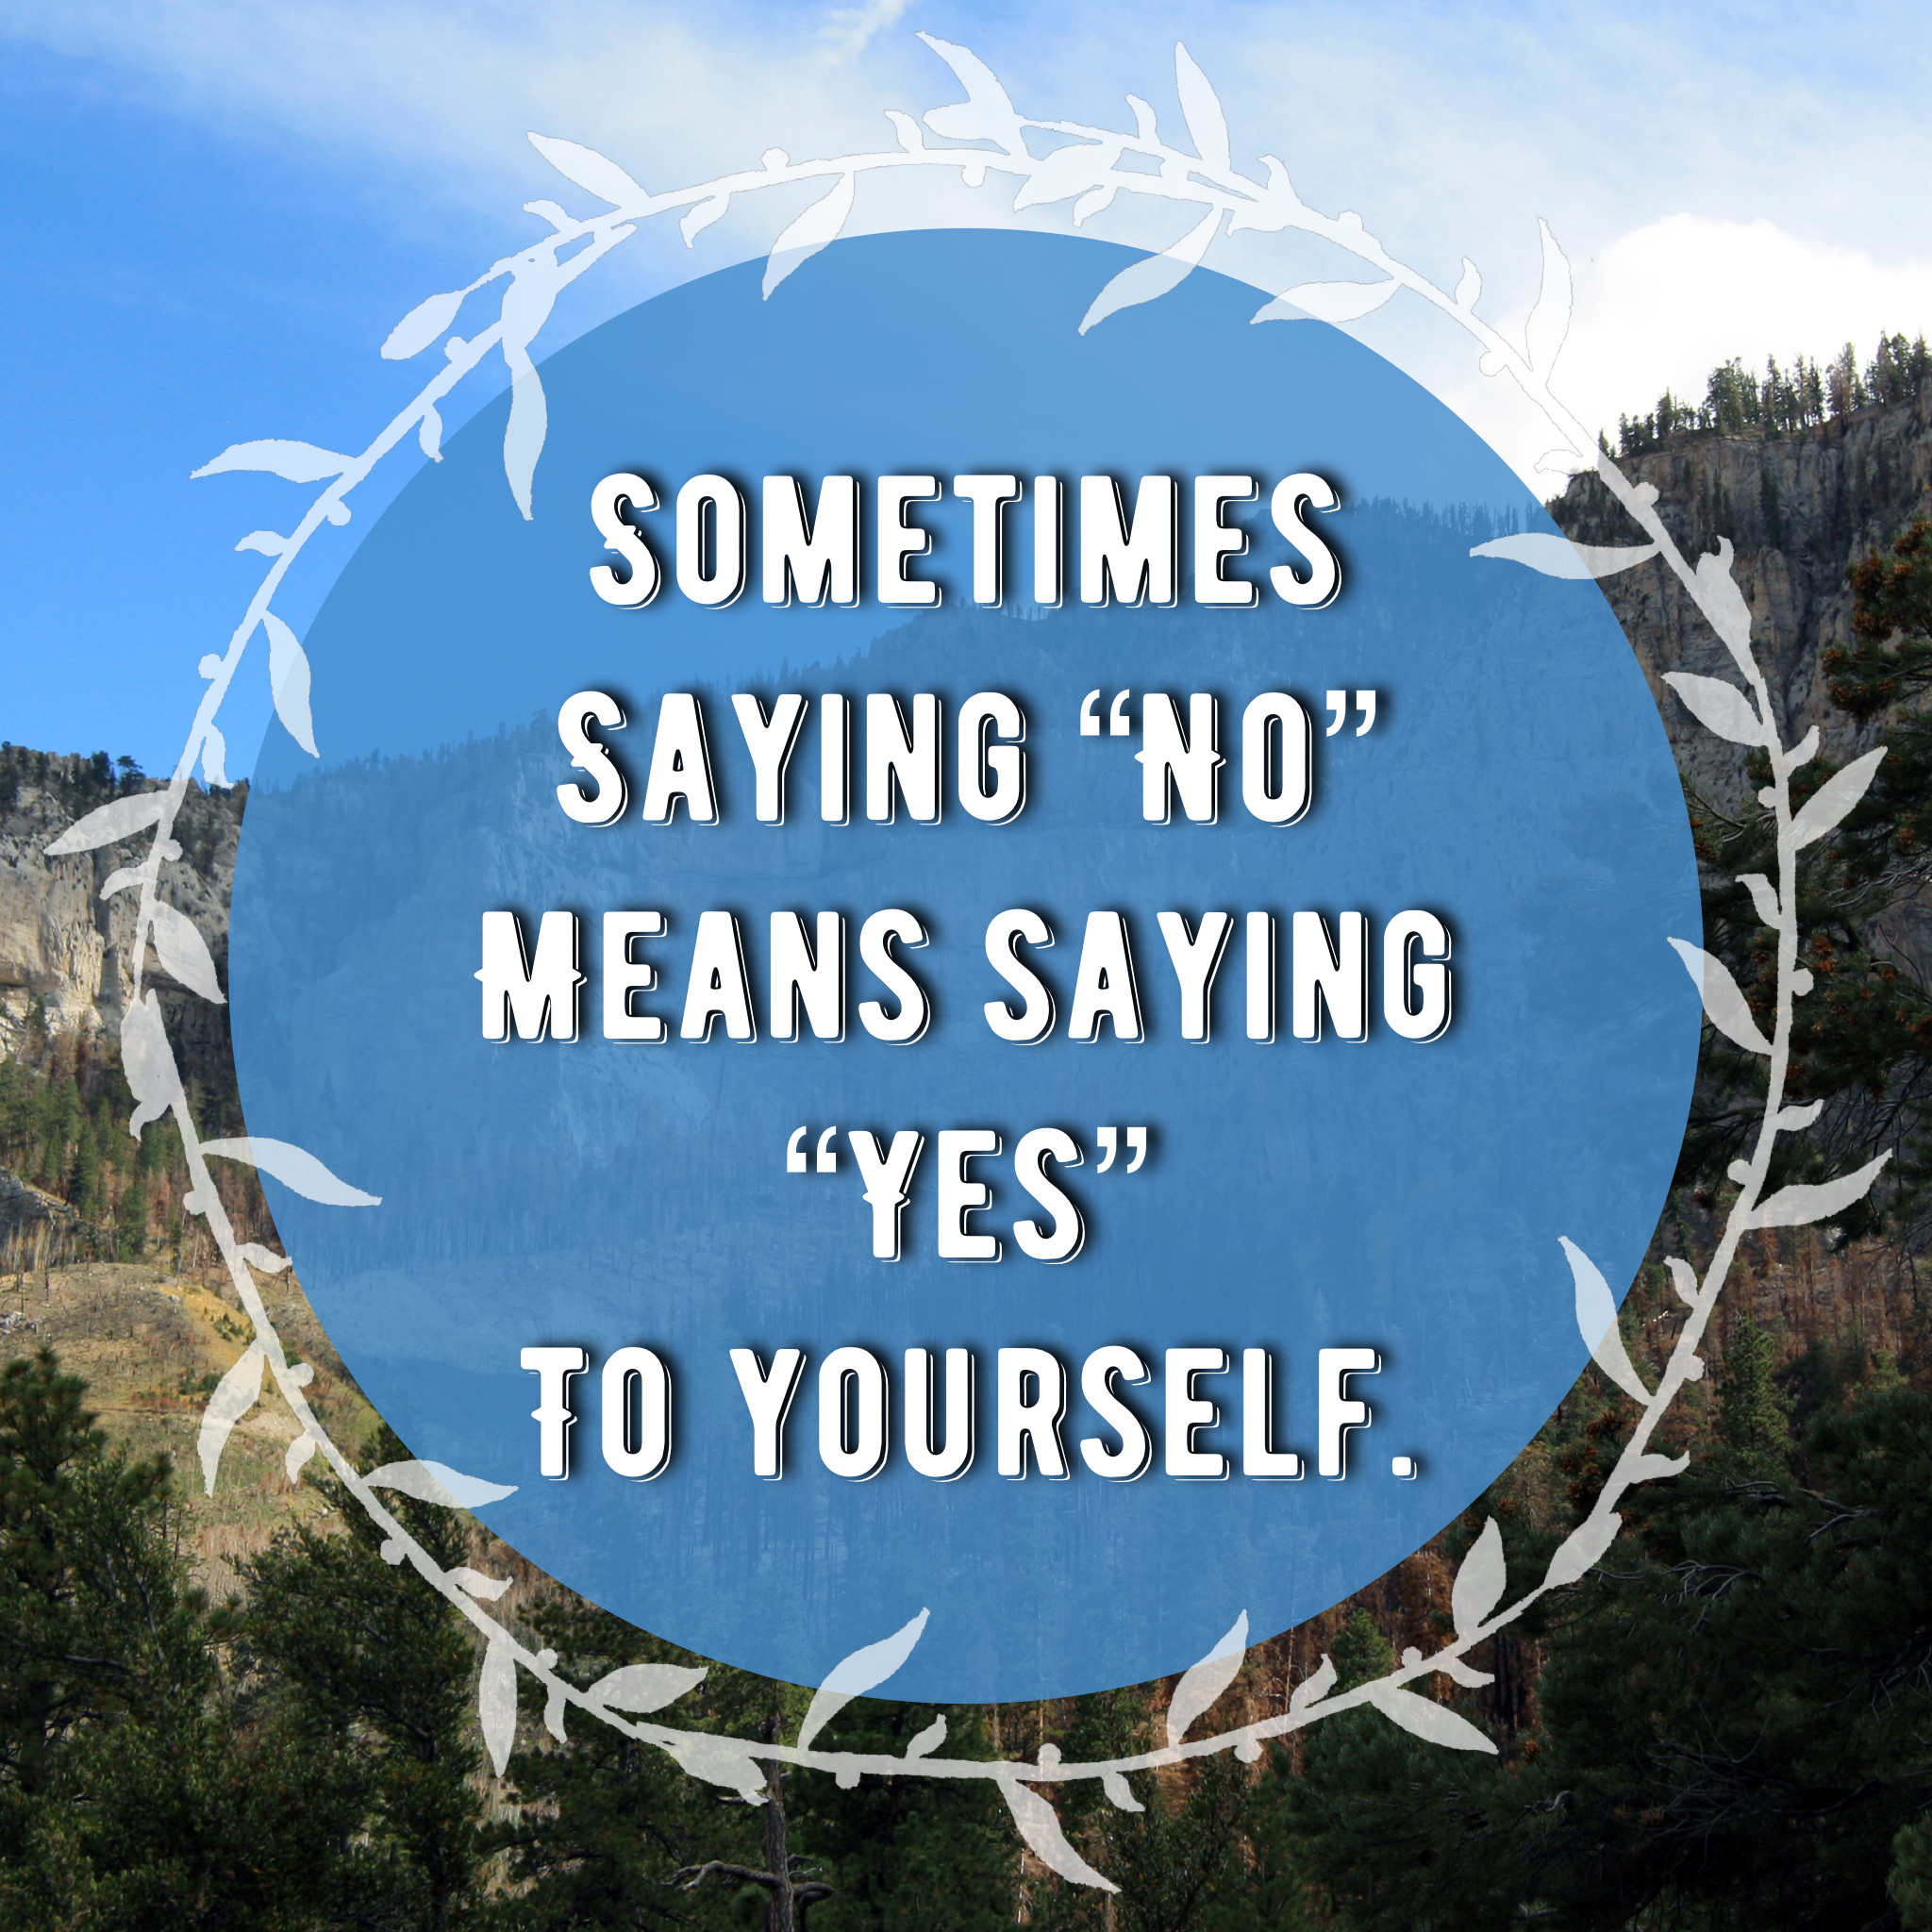 3 Questions to Ask Yourself to Stop Saying “Yes” When You Want to Say “No”